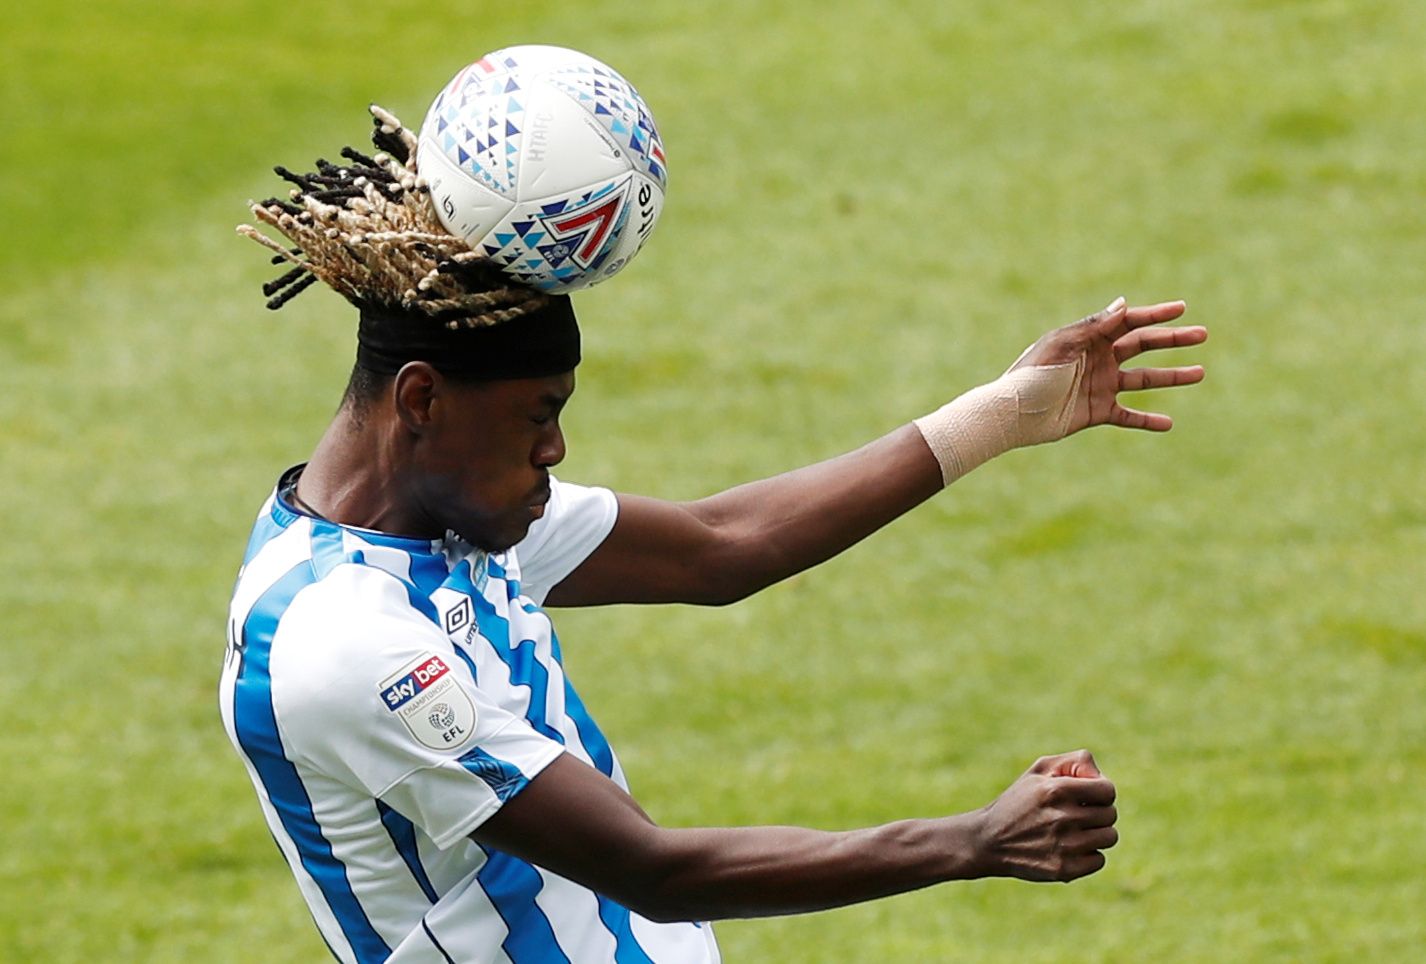 Soccer Football - Championship - Huddersfield Town v Preston North End - John Smith's Stadium, Huddersfield, Britain - July 4, 2020 Huddersfield's Trevoh Tom Chalobah in action, as play resumes behind closed doors following the outbreak of the coronavirus disease (COVID-19)  Action Images/Lee Smith  EDITORIAL USE ONLY. No use with unauthorized audio, video, data, fixture lists, club/league logos or 